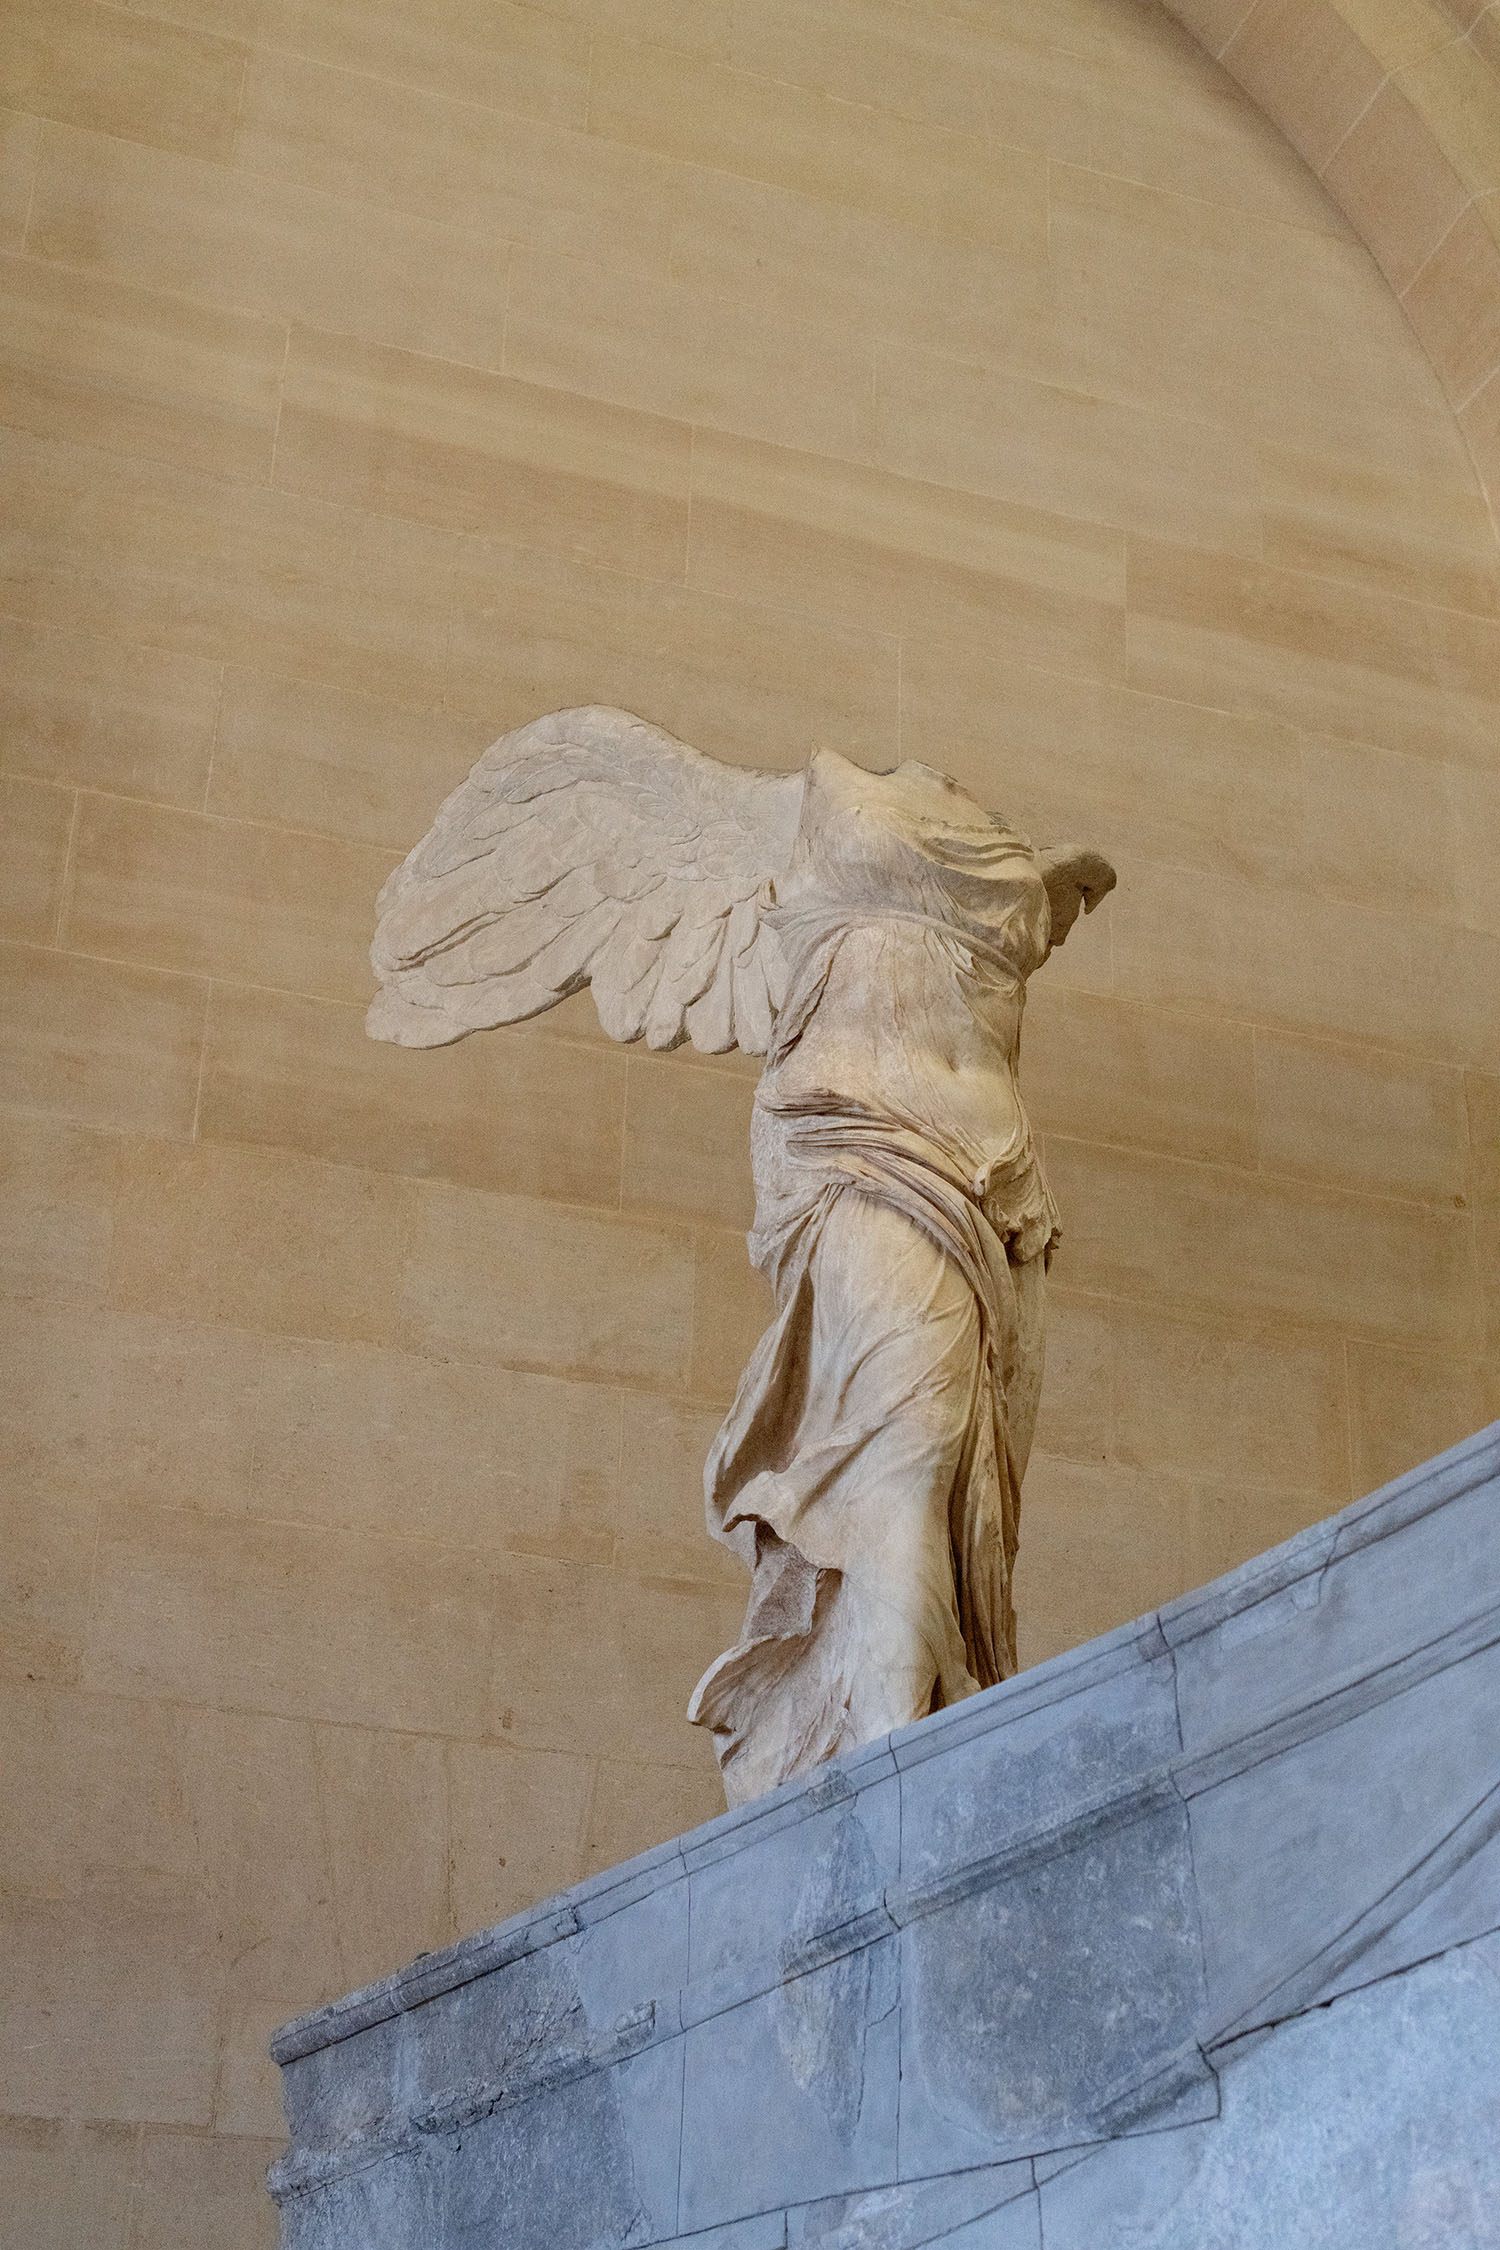 Coco & Voltaire - Winged Victory of Samothrace at the Louvre Museum in Paris